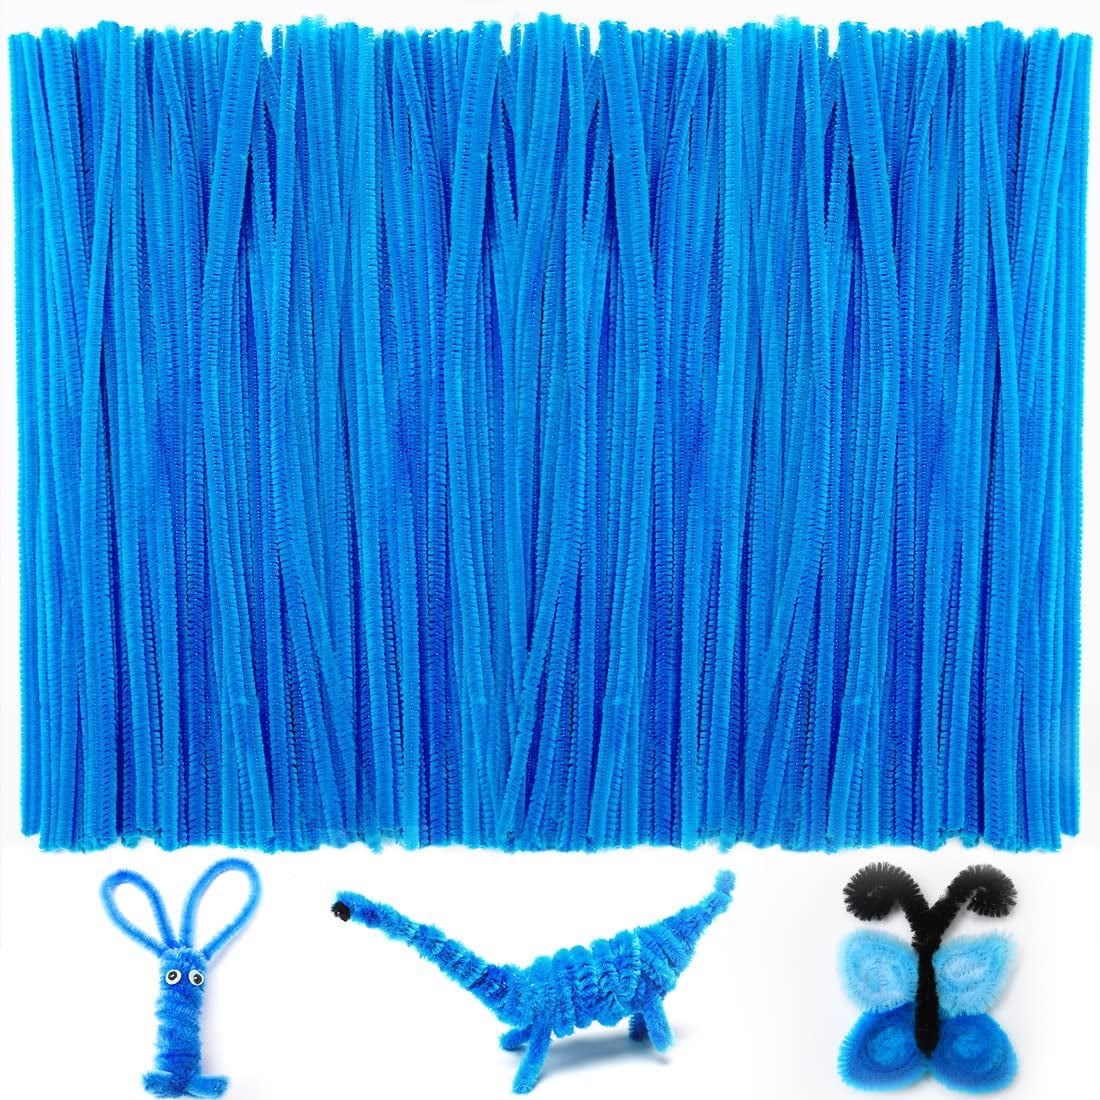  FirstKitchen Pipe Cleaners Craft, 200pcs Black Pipe